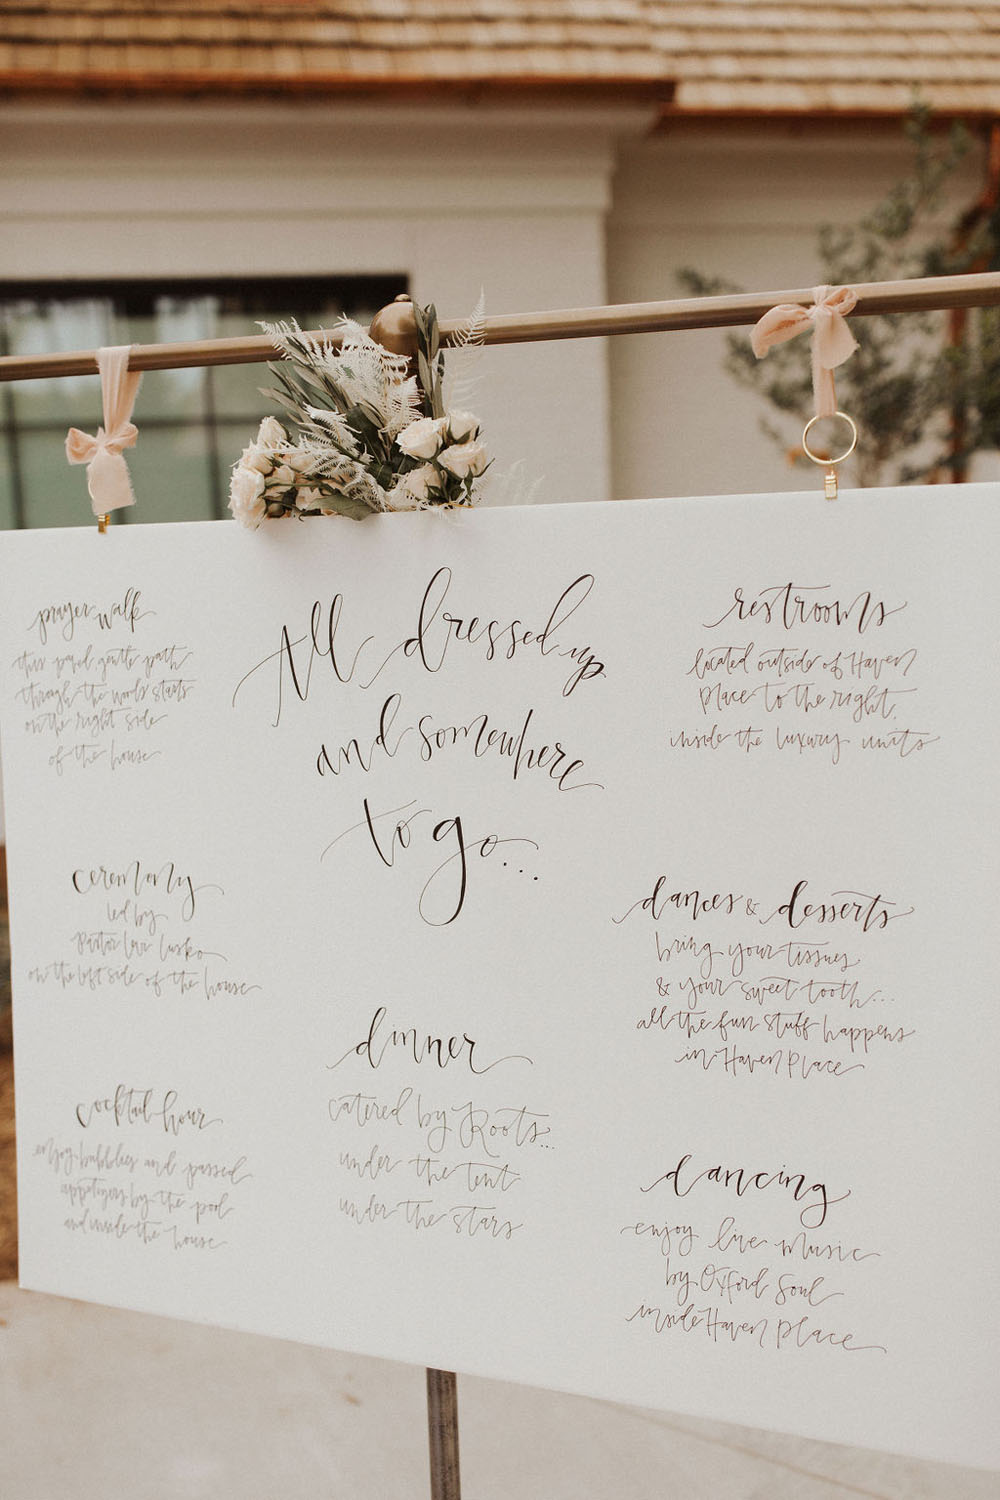 Intimate wedding at a home in North Carolina with a neutral color palette